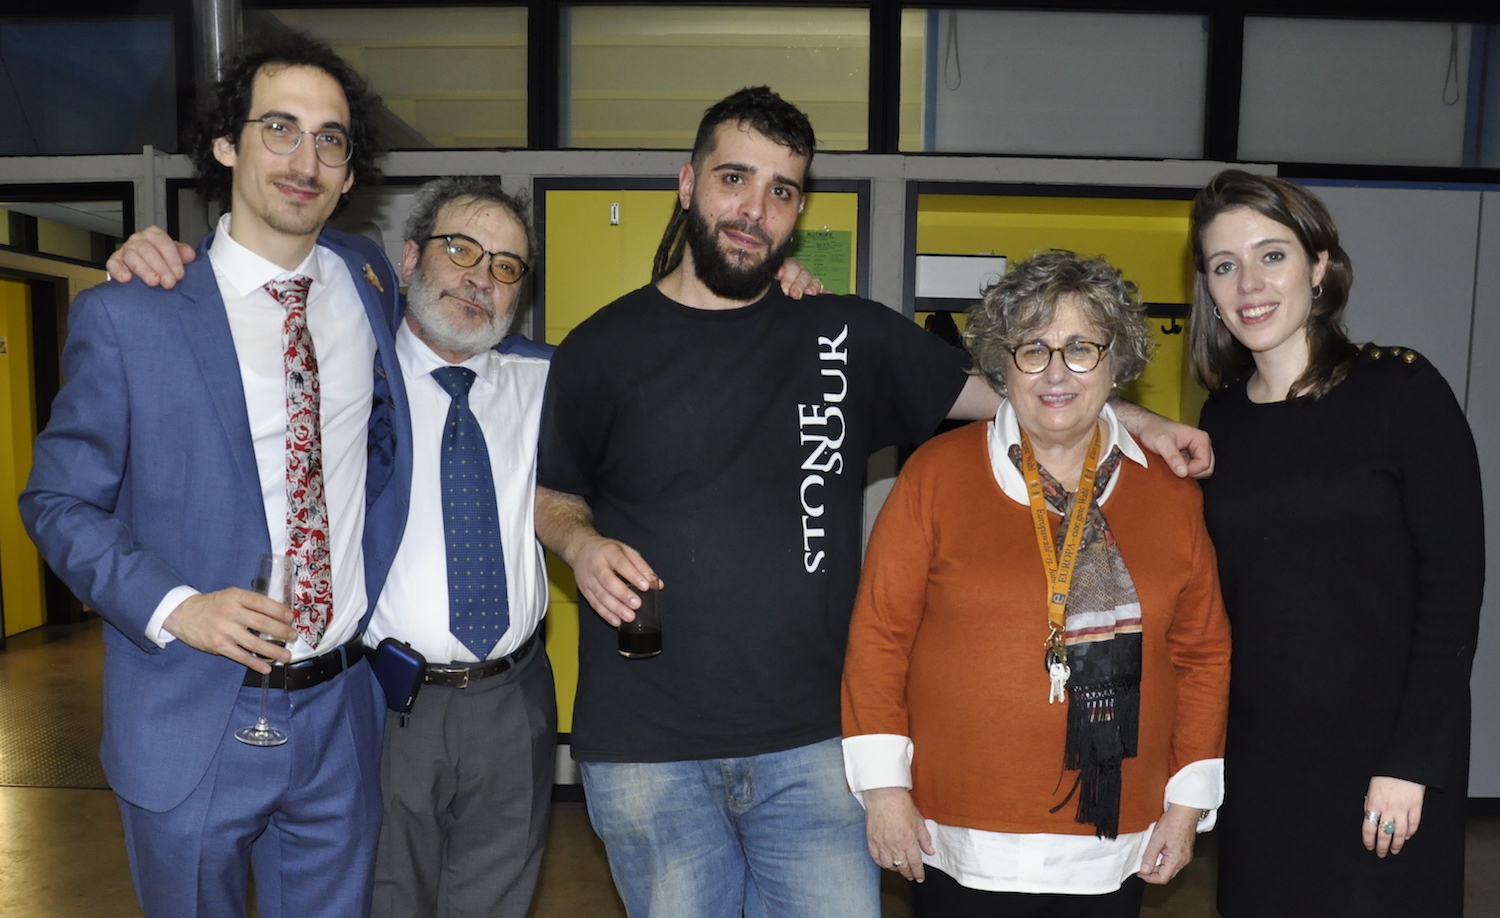 Josue Tonelli-Cueto with his parents and friends from Bilbao.